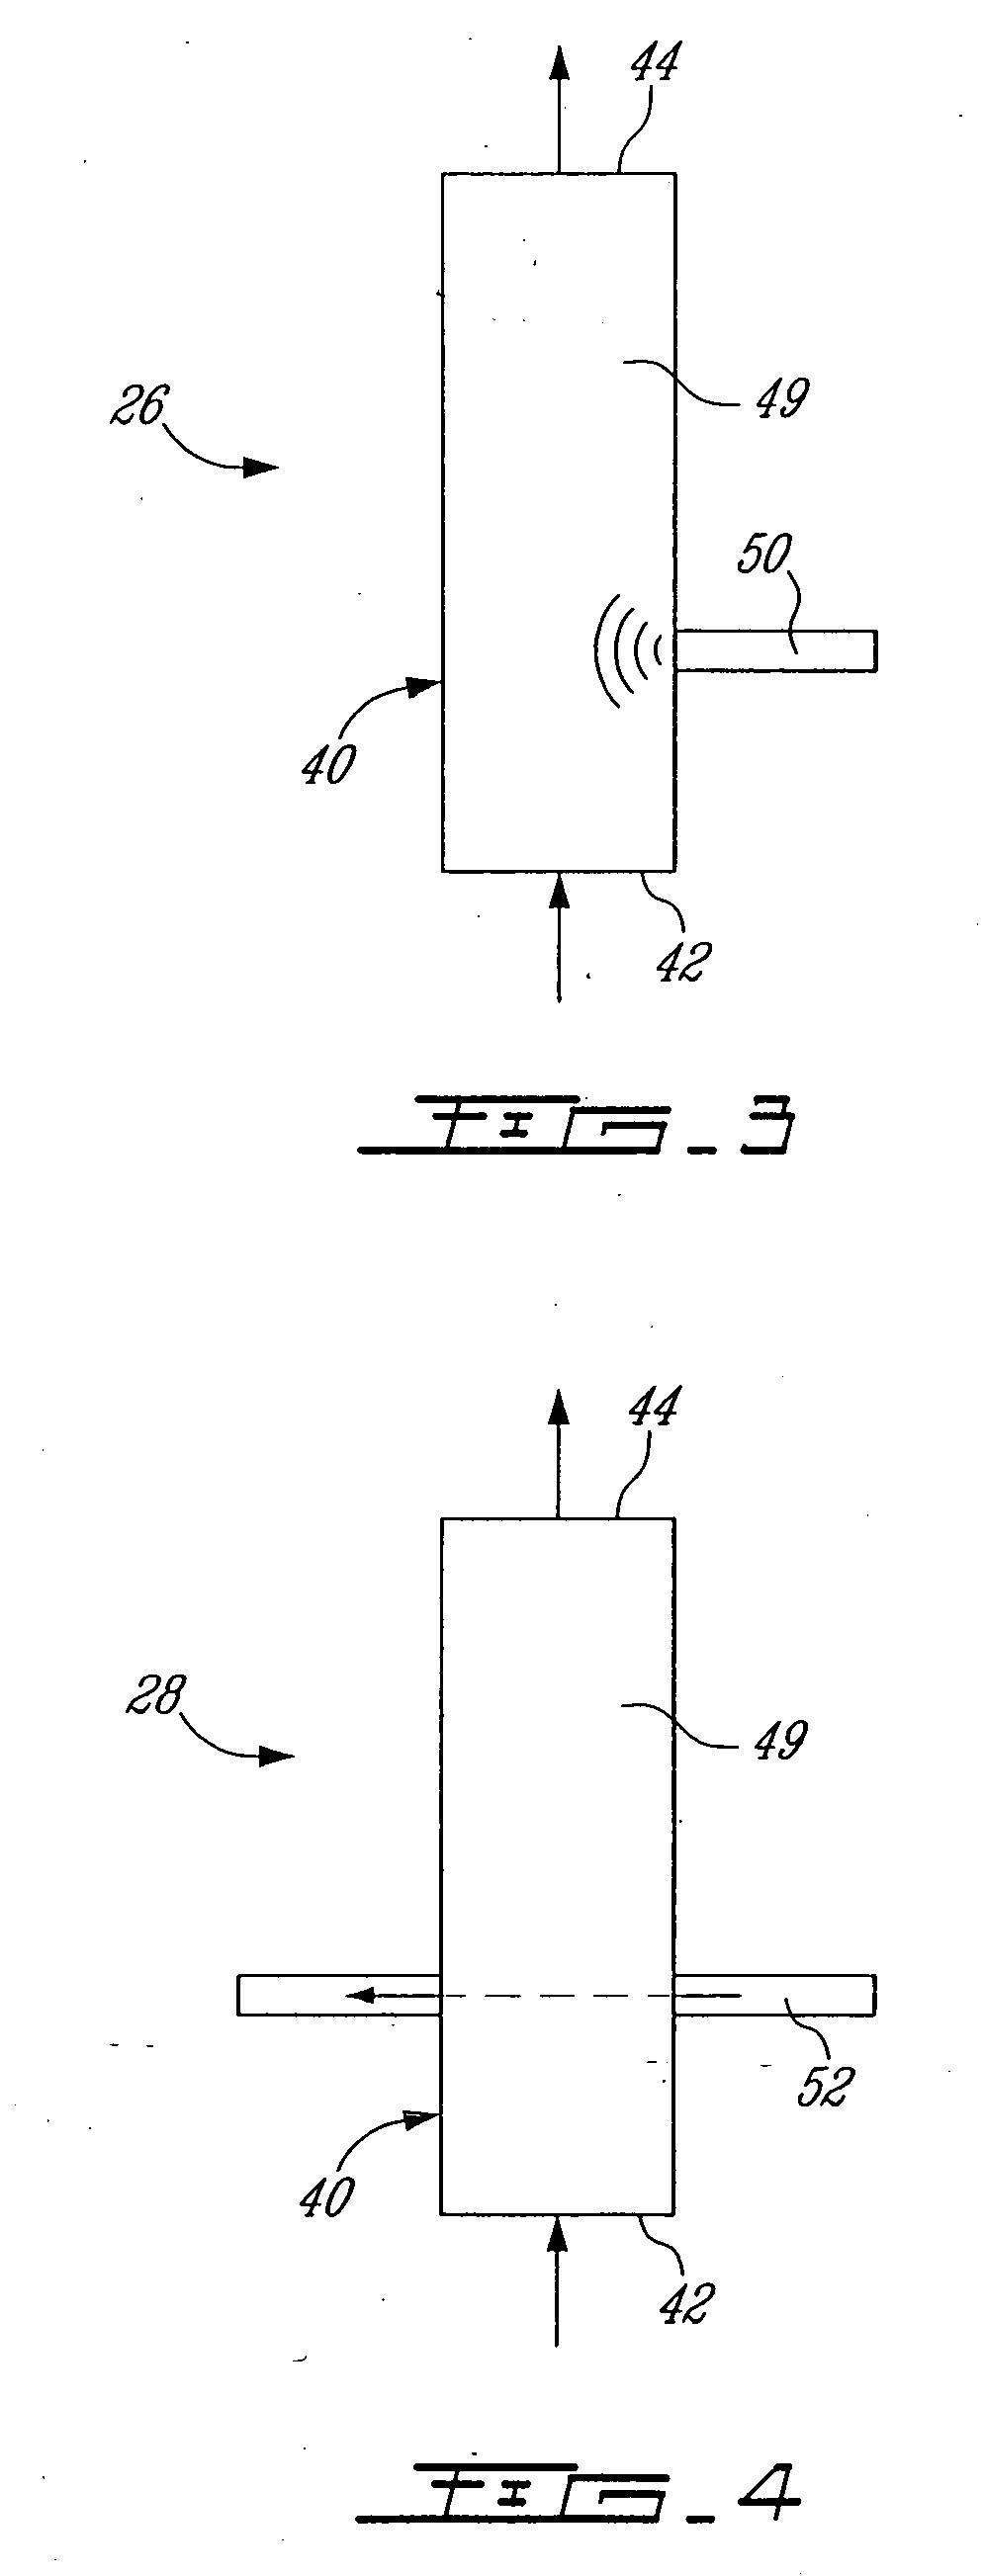 Methods and apparatuses for purifying carbon filamentary structures